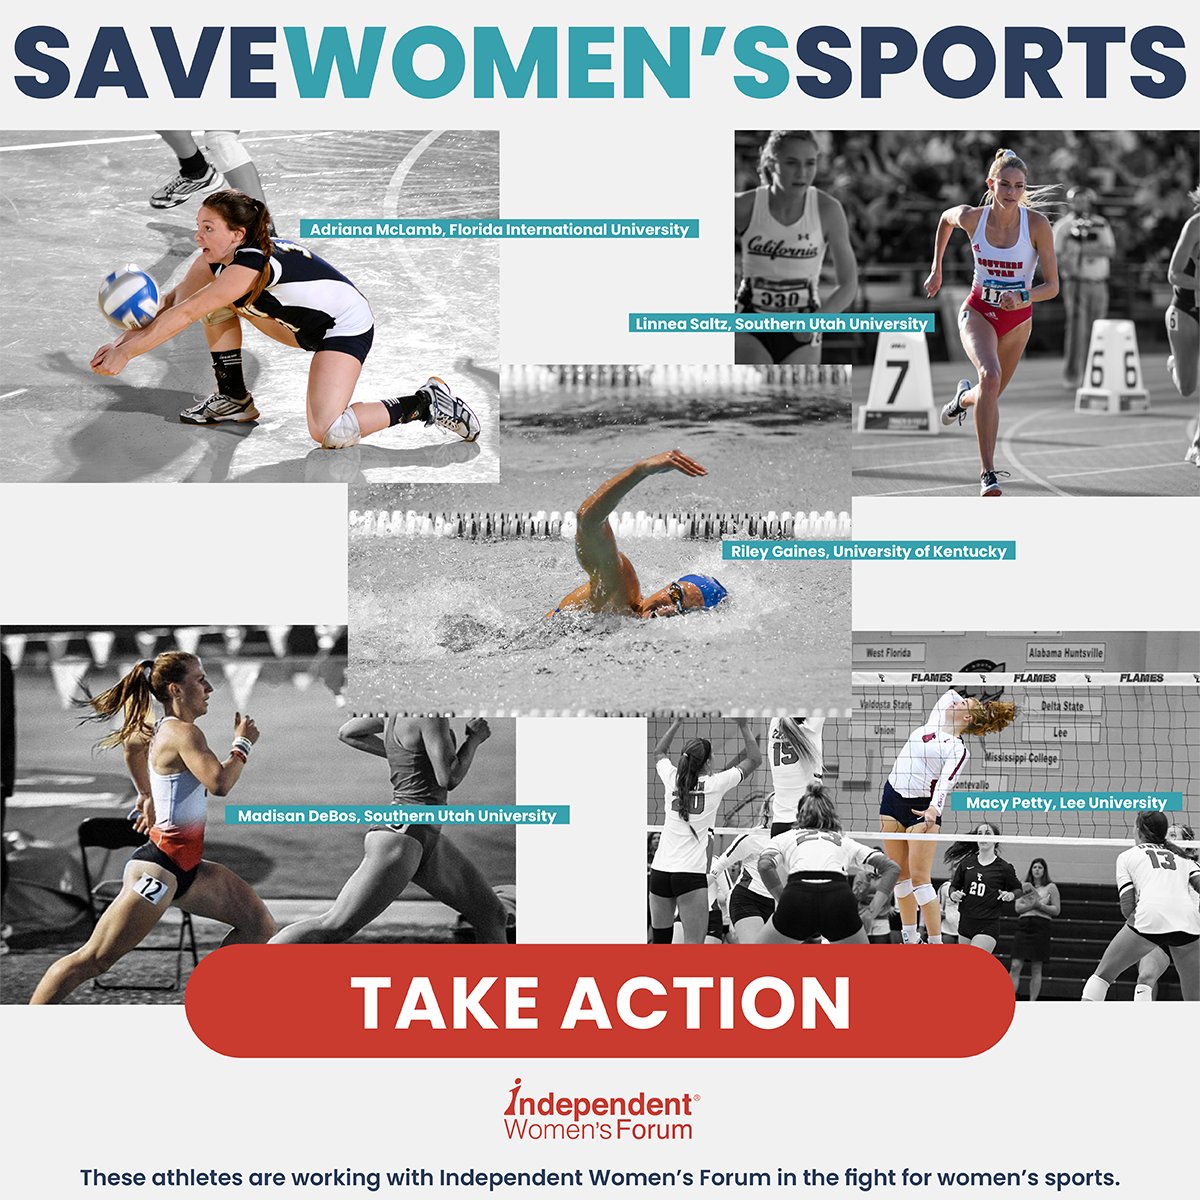 🚨Join NCAA athletes in the fight to #SAVEWOMENSSPORTS! @Riley_Gaines_ & other brave female athletes are leading the charge to protect women's sports! Join them in taking action & tell the NCAA: Stop discriminating against female athletes!👇bit.ly/3JjSkG8